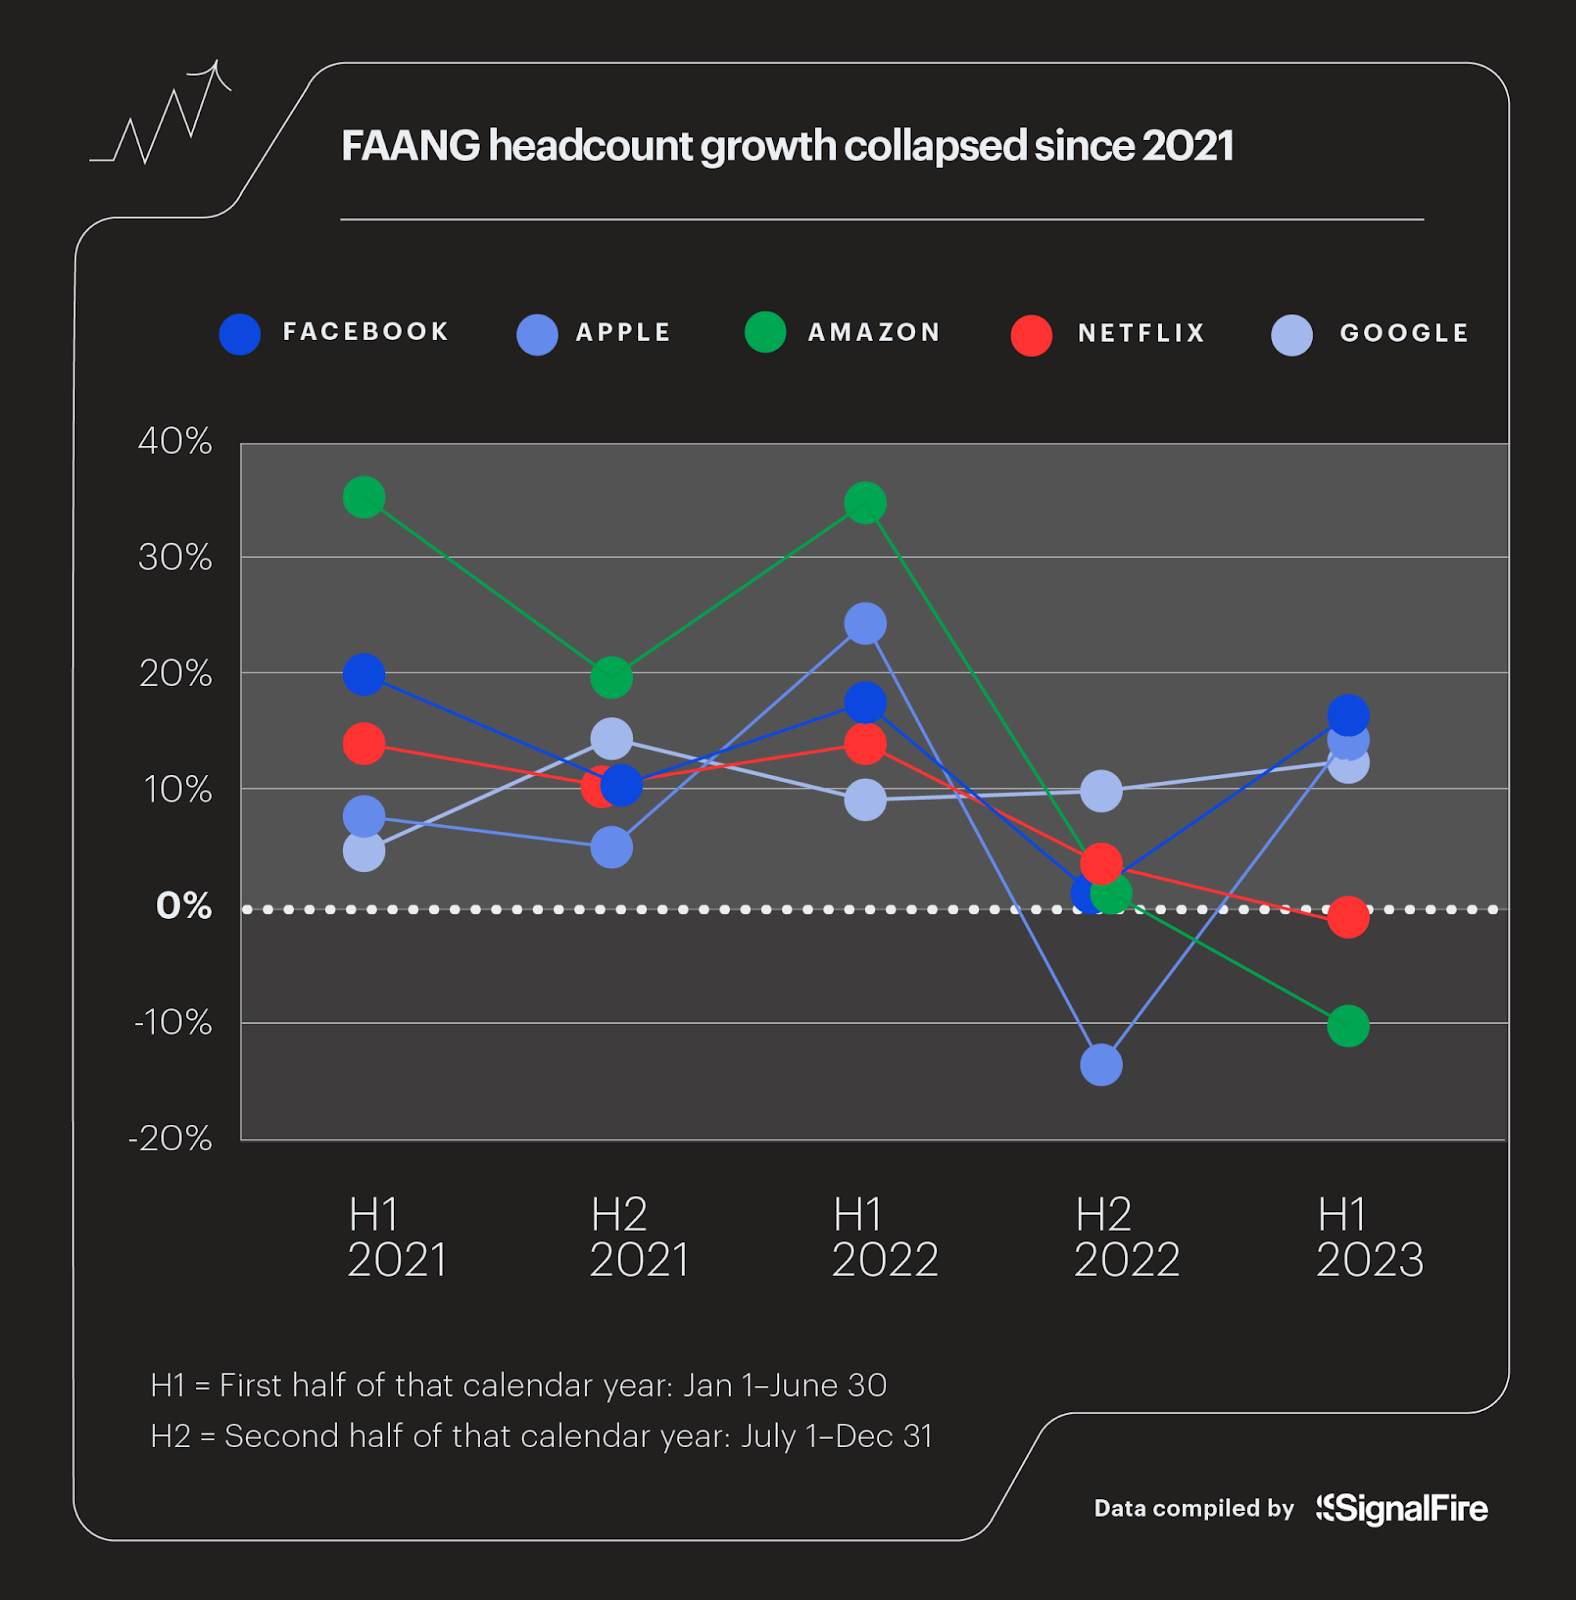 FAANG headcount growth falls sharply from 2021